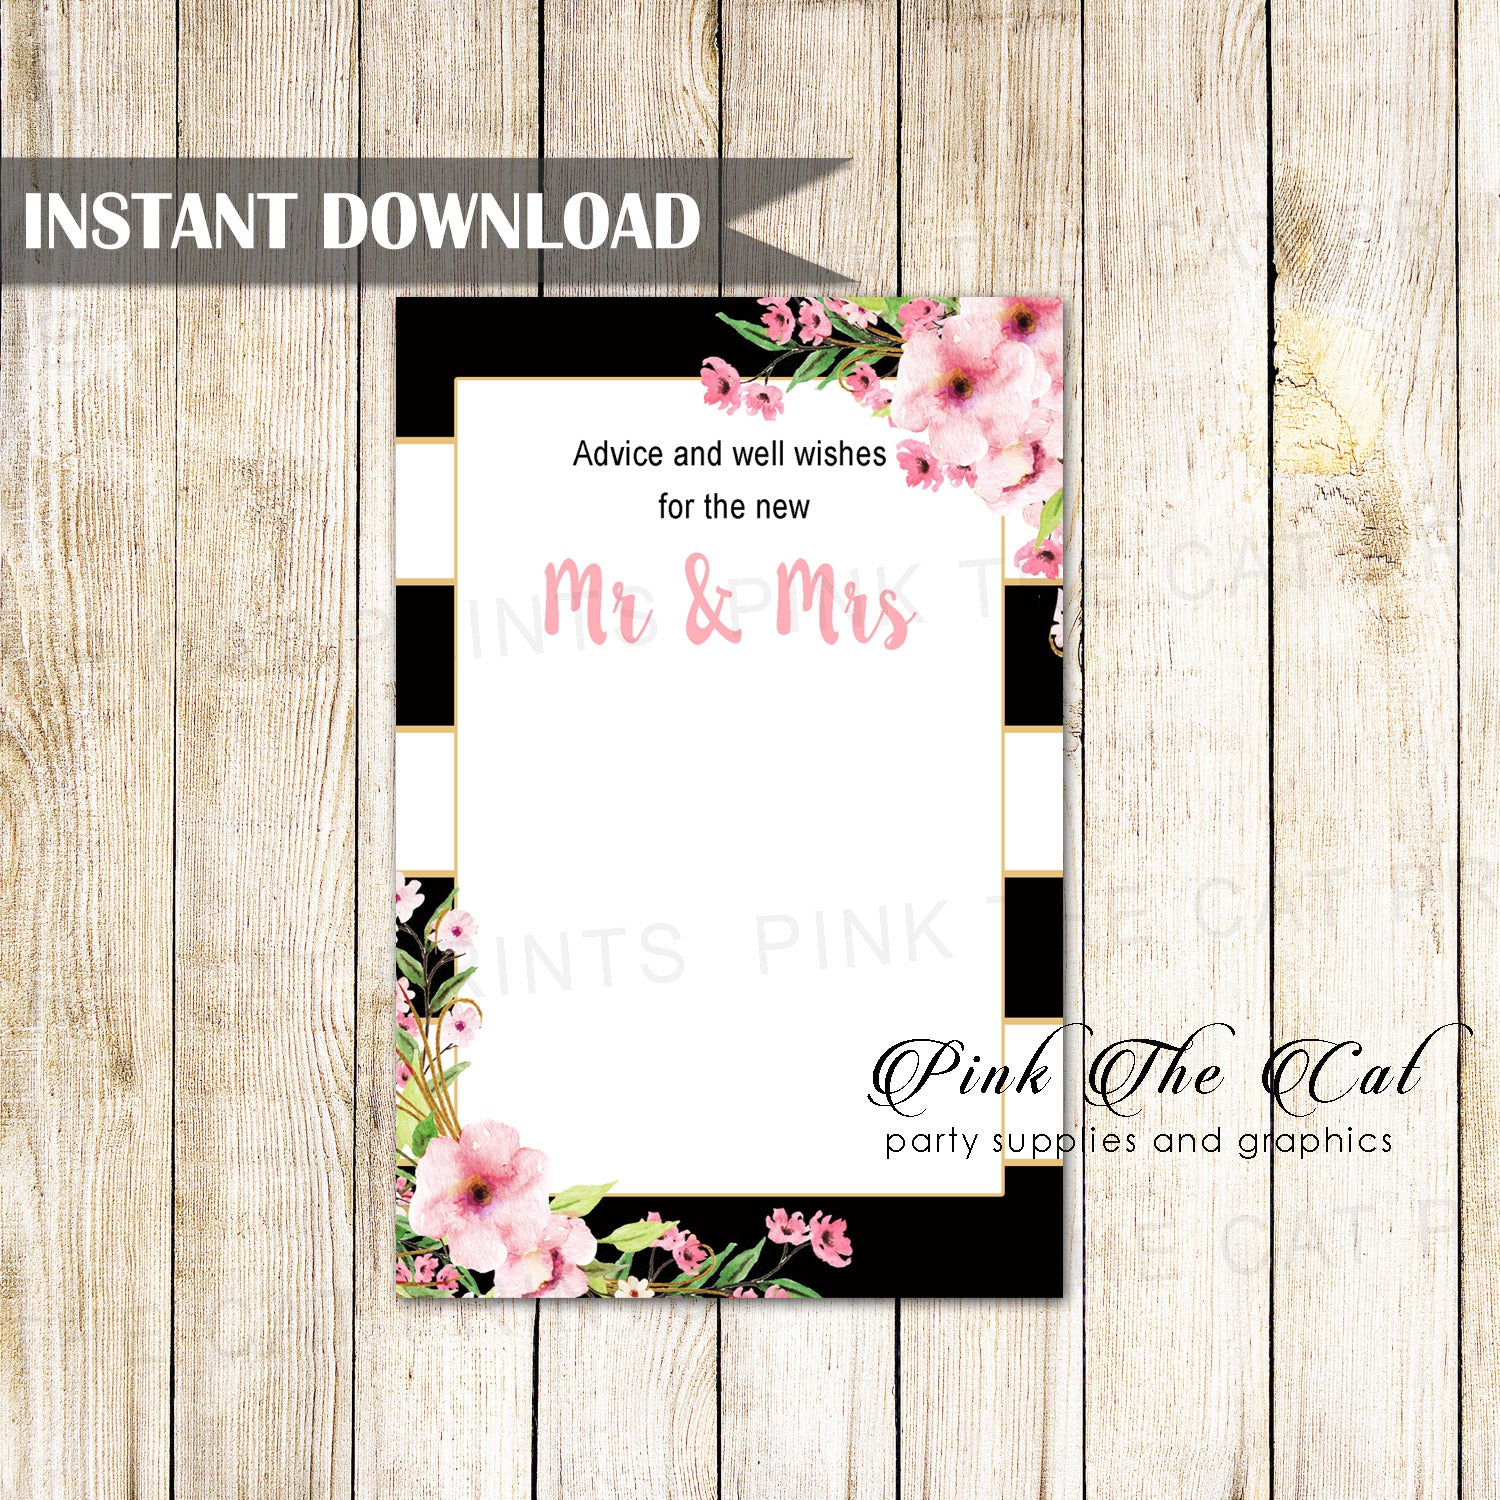  Wedding well wishes advice cards pink floral black printable